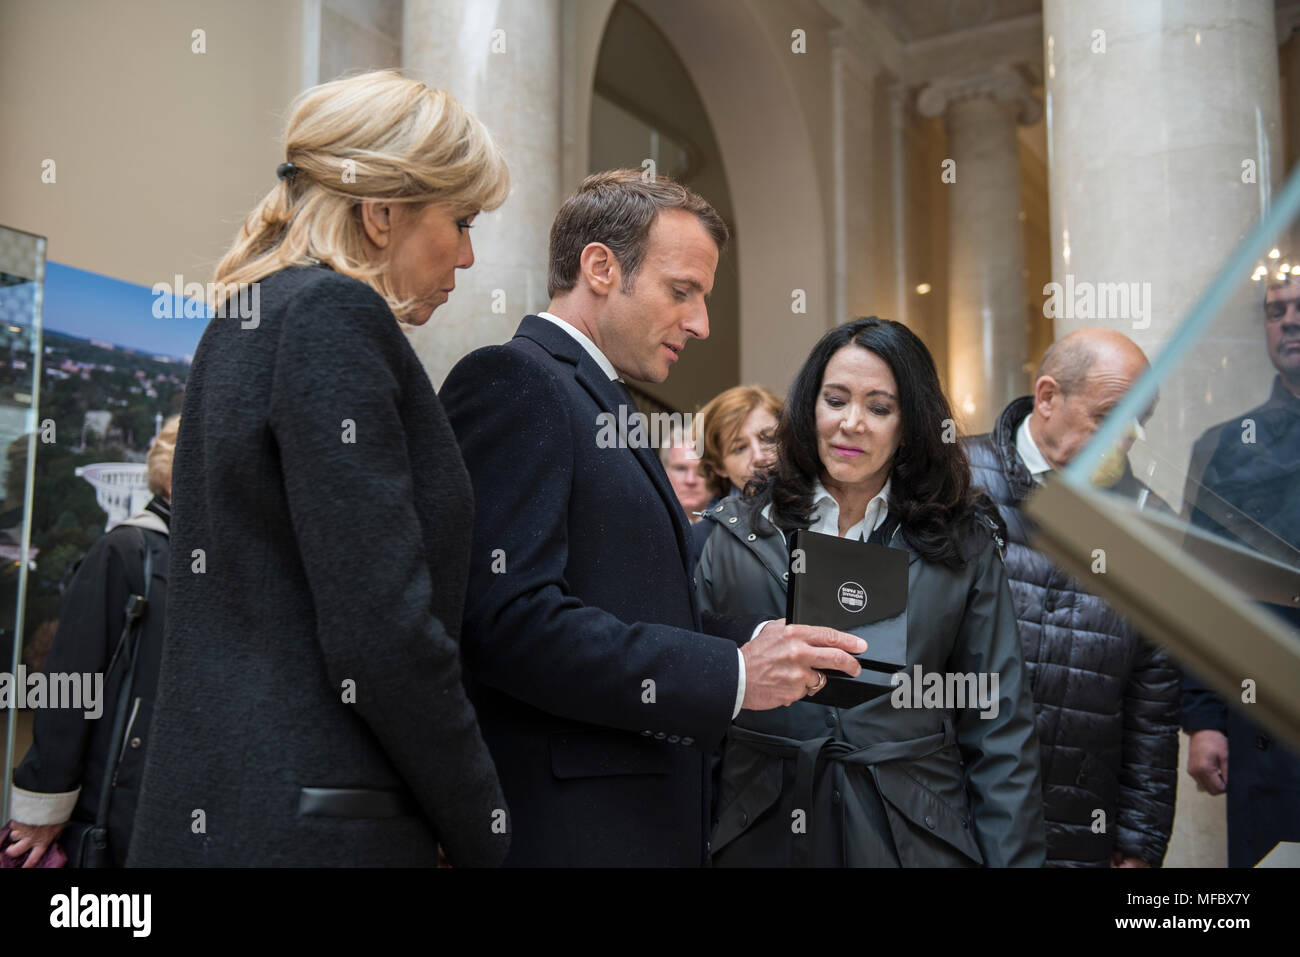 French President Emmanuel Macron (center) with his wife, Brigitte Macron (left), presents a gift to Karen Durham-Aguilera (right), executive director, Army National Military Cemeteries, in the Memorial Amphitheater Display Room at Arlington National Cemetery, Arlington, Virginia, April 24, 2018.  President Macron’s visit to Arlington National Cemetery was part of the first official State Visit from France since President Francois Hollande came to Washington in 2014. The French President along with his wife also visited the gravesite of former President John F. Kennedy. (U.S. Army photo by Eliz Stock Photo